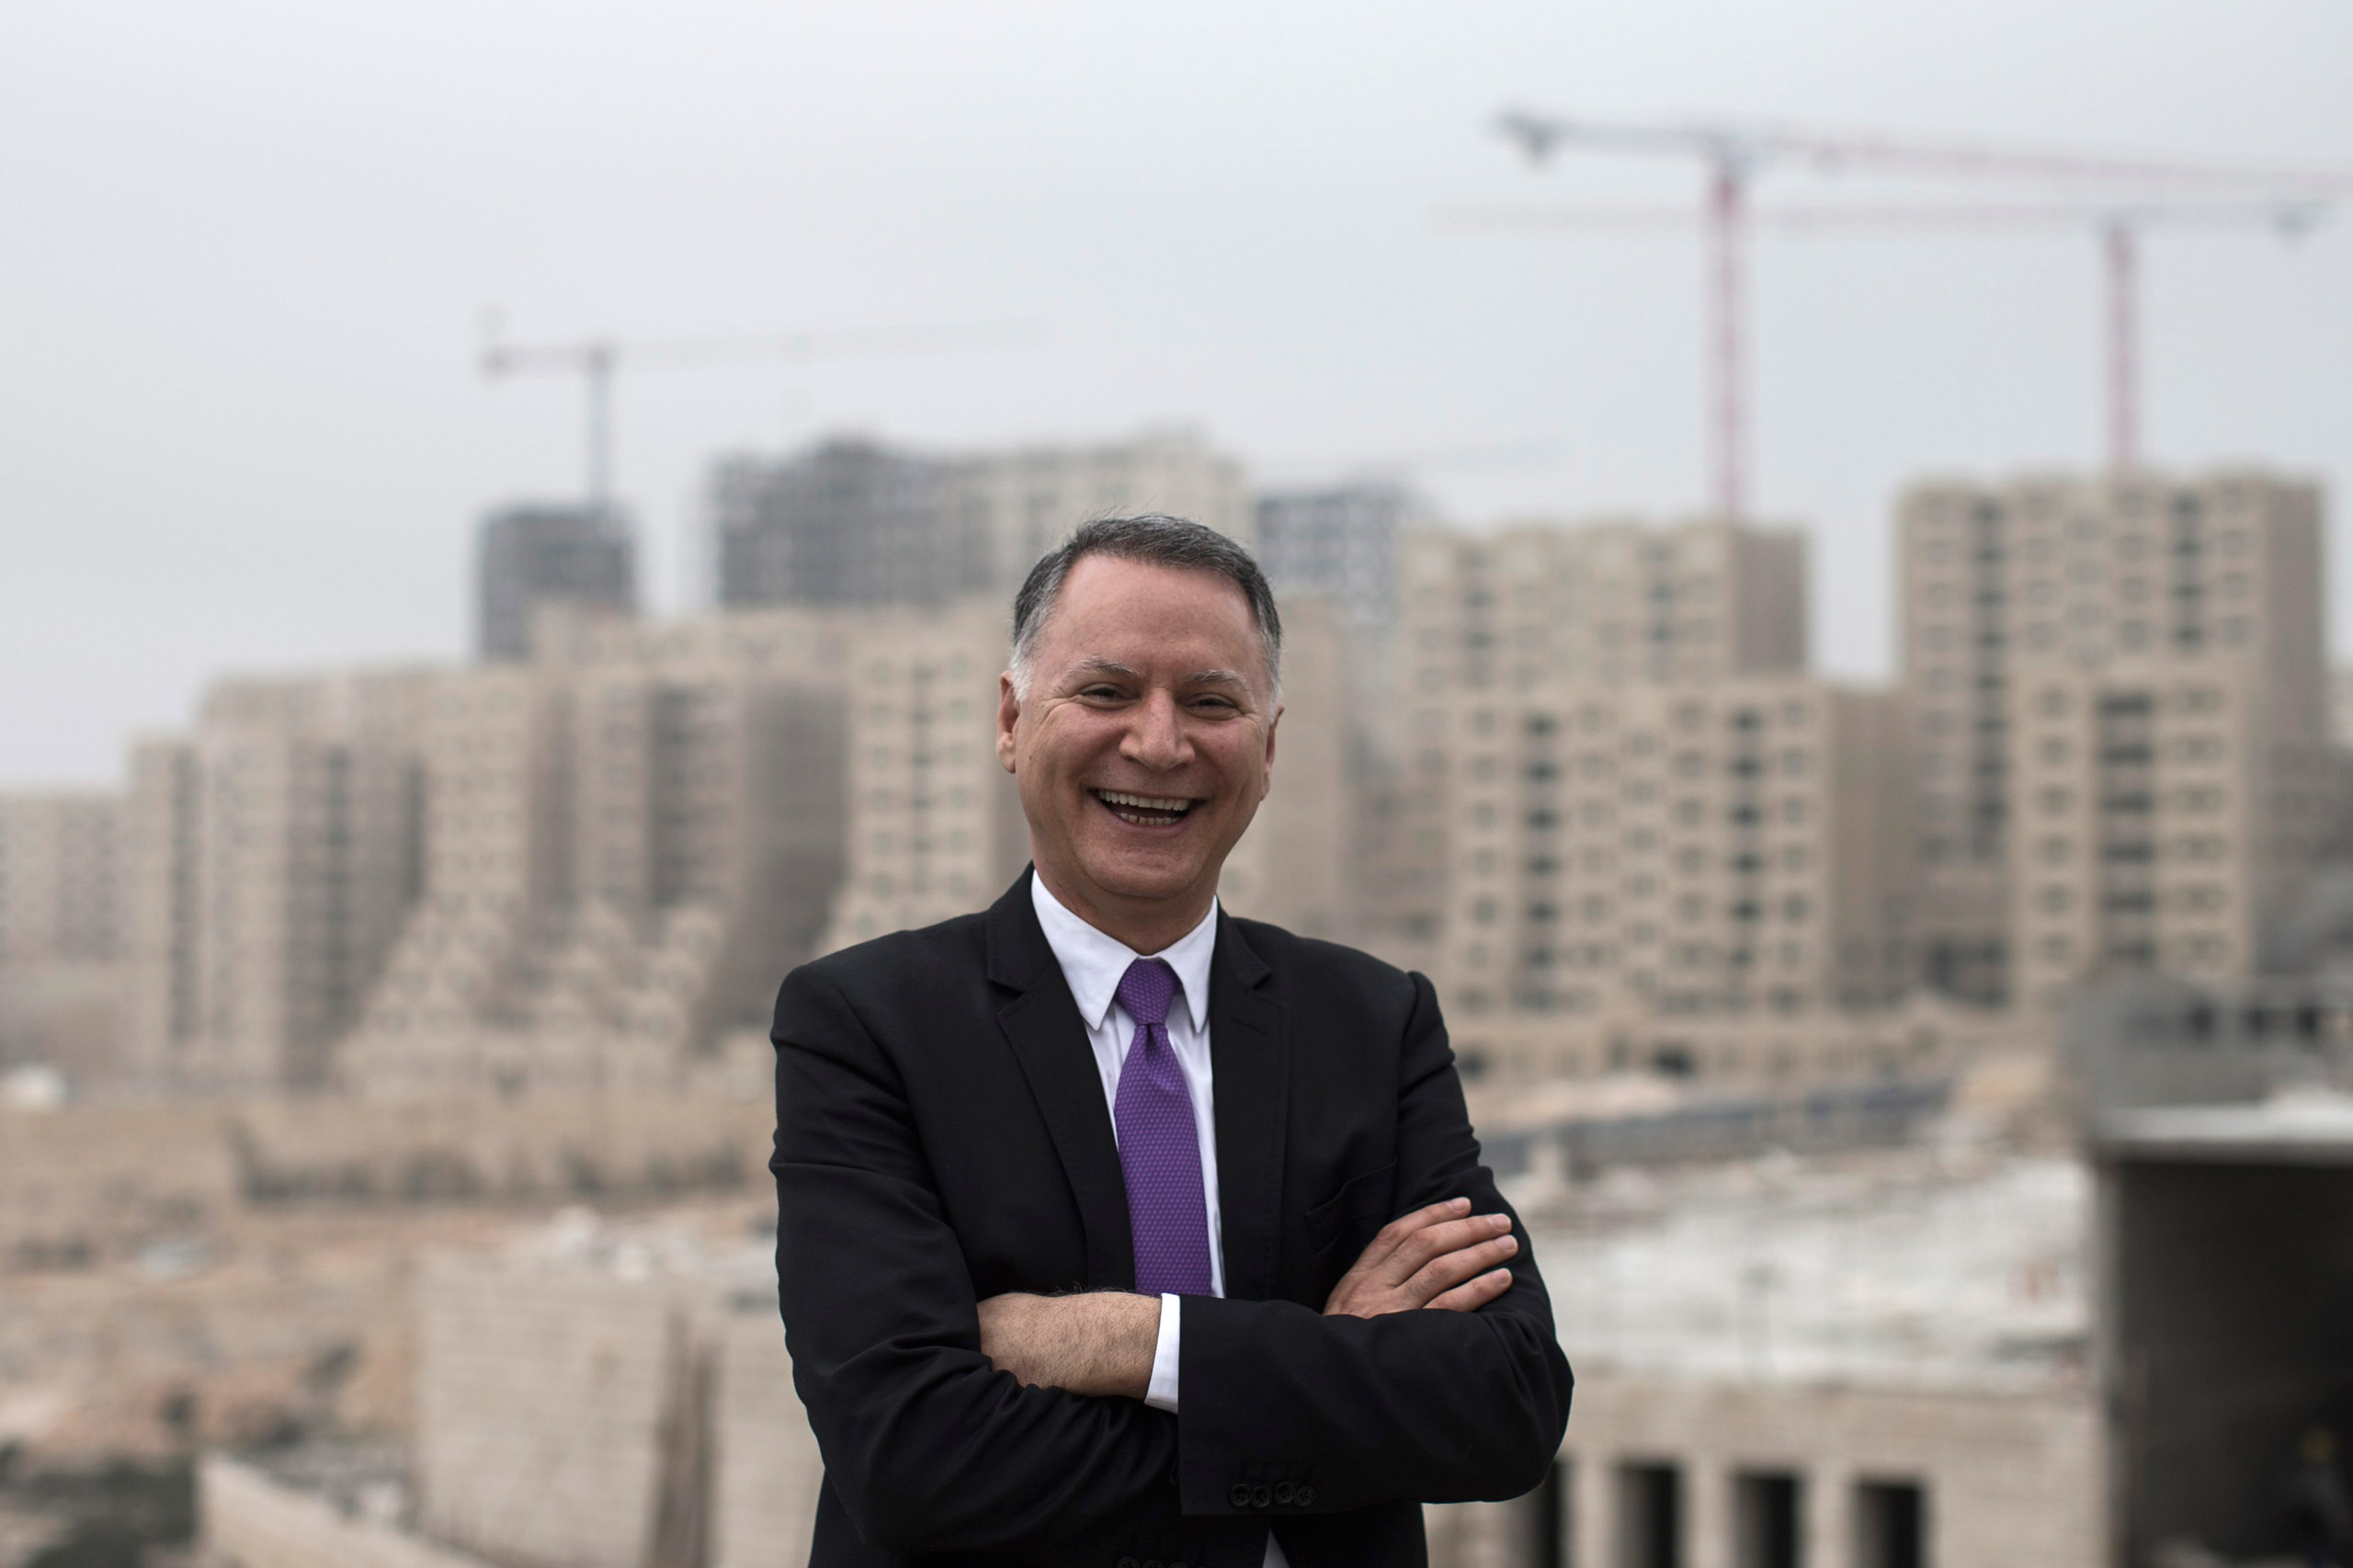 Bashar Masri, main investor of the new Palestinian city of Rawabi, in front of an apartment building under construction in Rawabi, West Bank, on Feb. 24, 2014. (Oliver Weiken—EPA/Corbis)